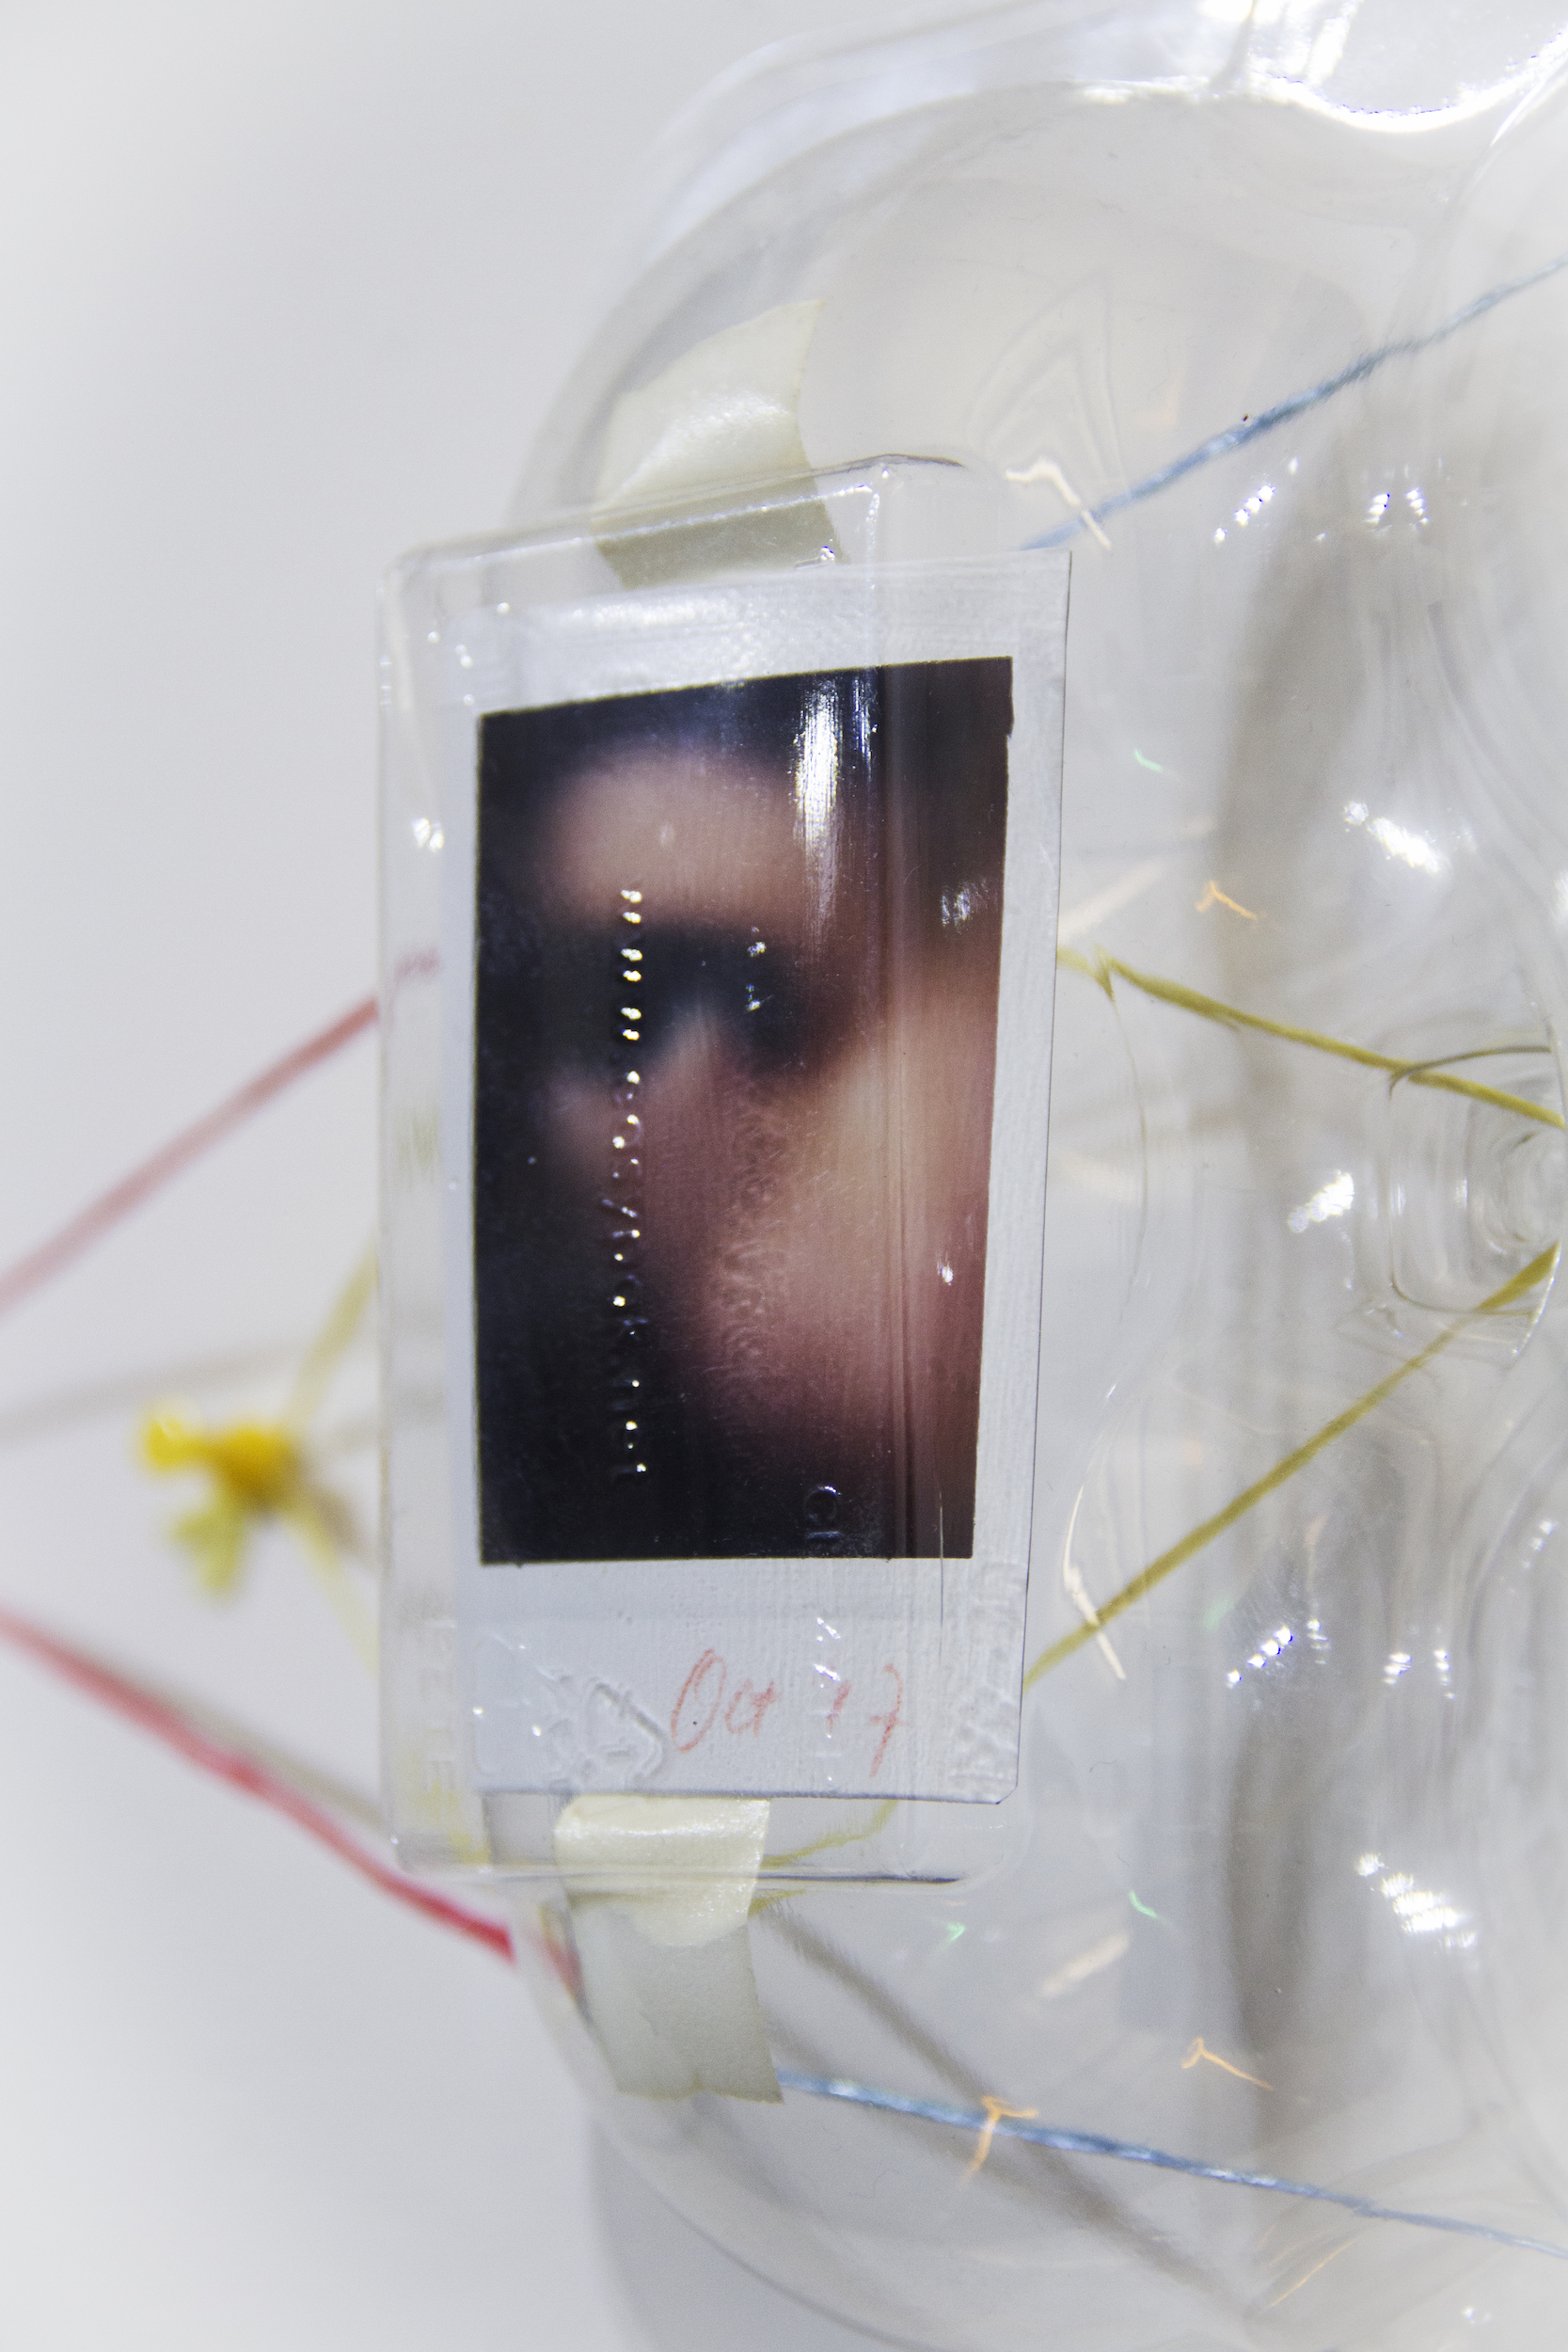    The time bender   (detail)  Used fruit packaging, Instax photo, artist tape, raffia string, and pin  19 1/2 x 7 1/2 x 3 6/8 inches  2018 